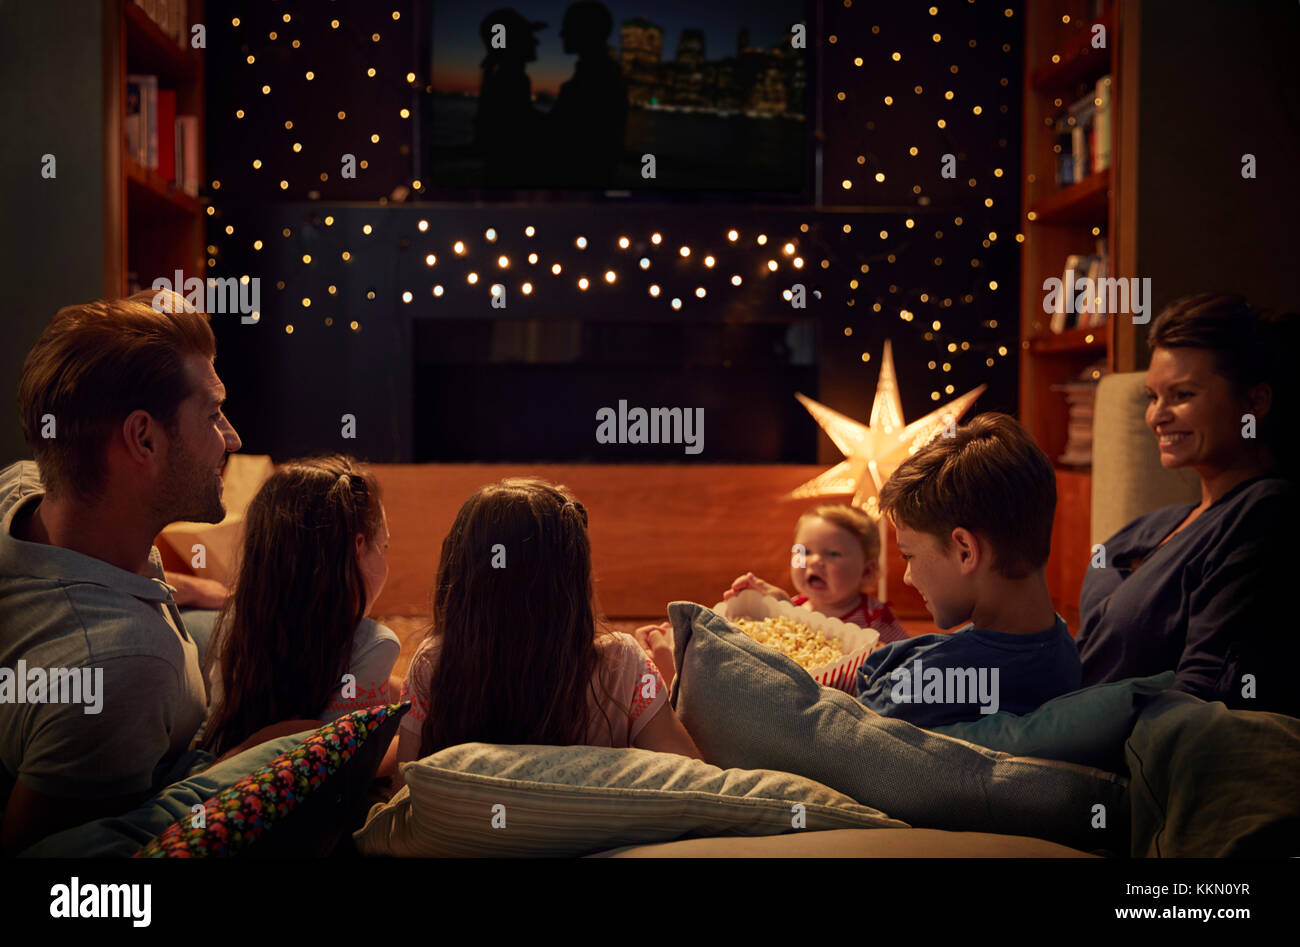 Family Enjoying Movie Night At Home Together Stock Photo